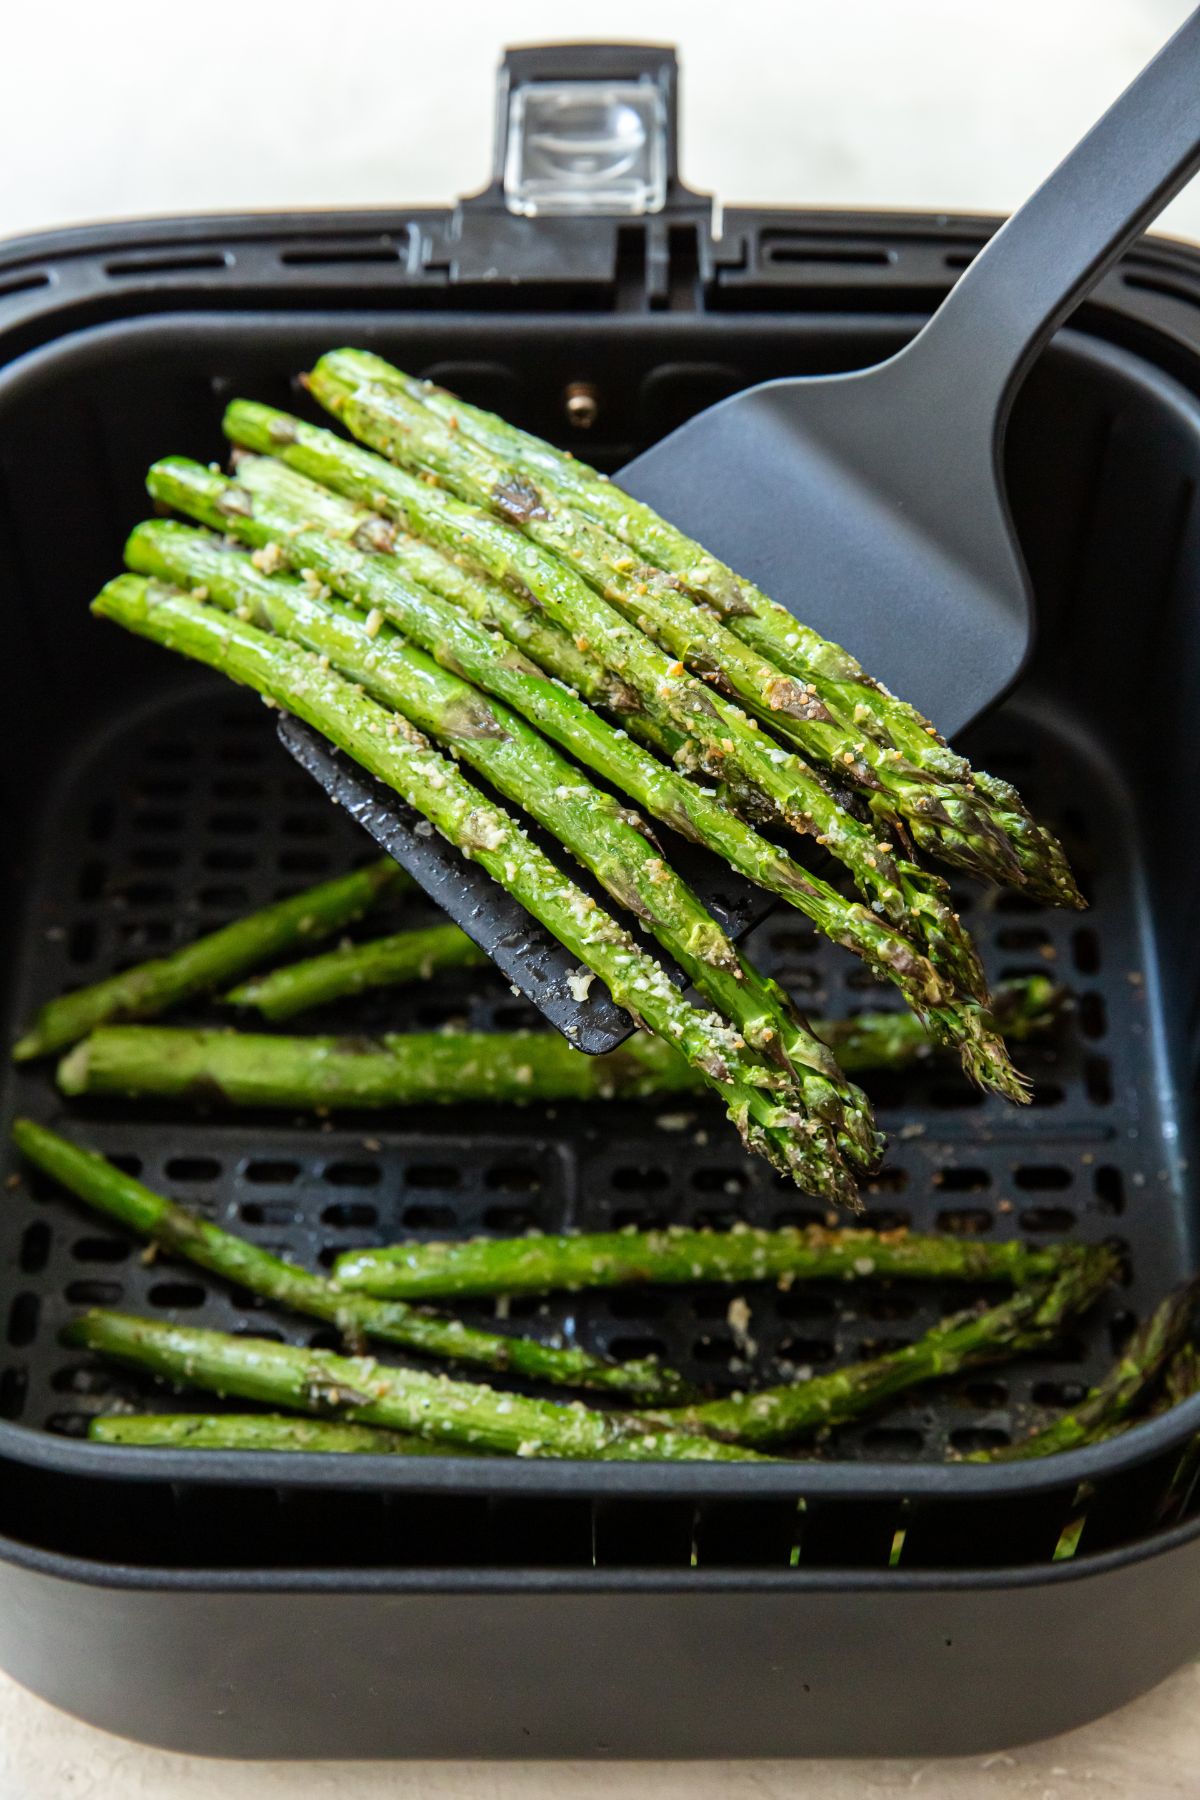 cooked asparagus in the air fryer being lifted by a spatula